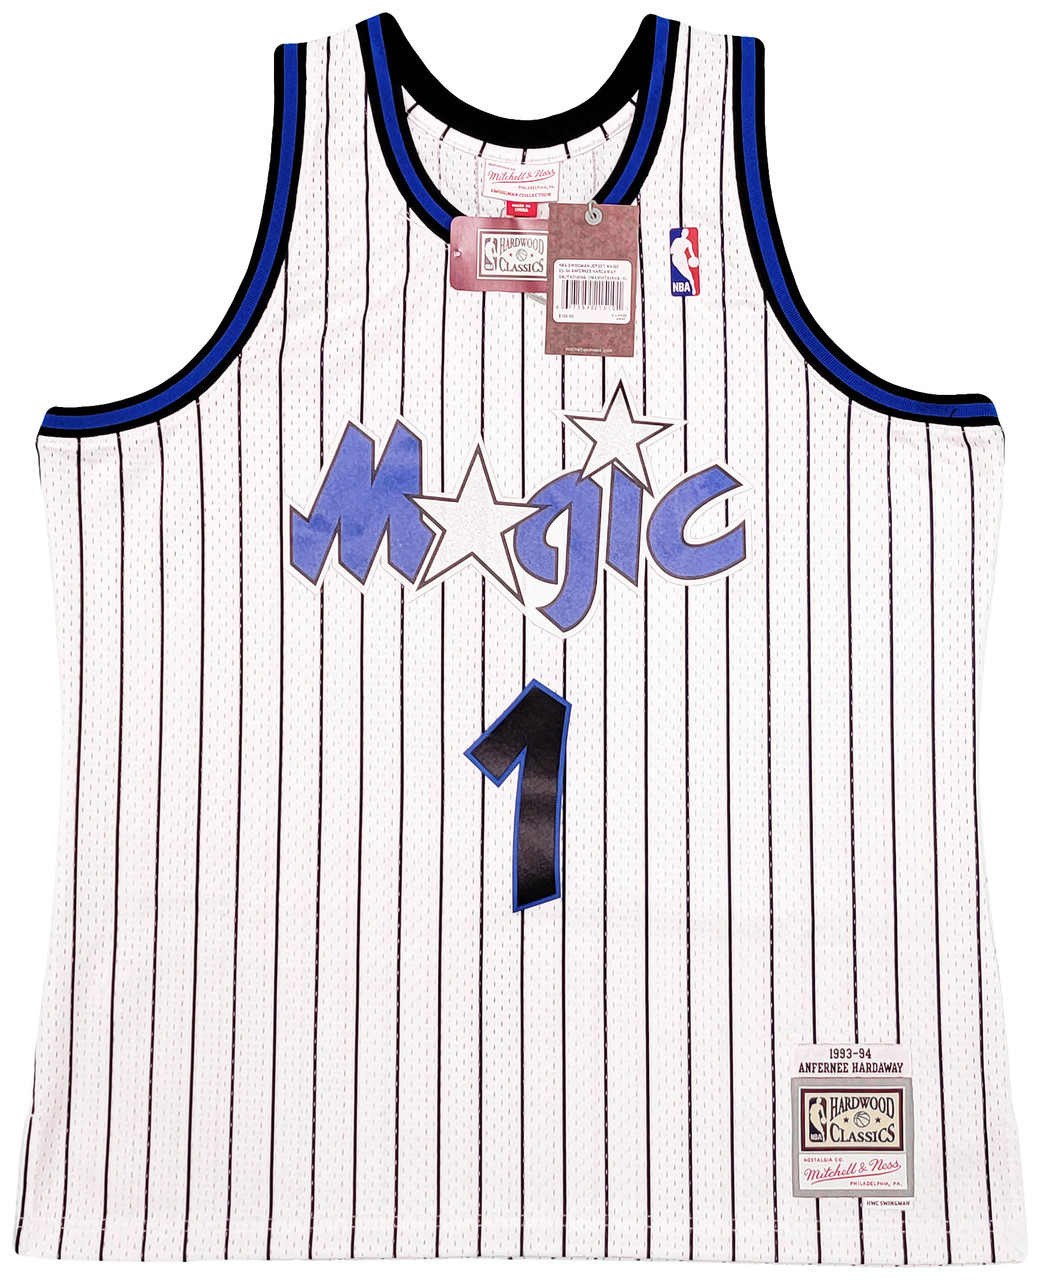 NBA_ jersey Men Mitchell and Ness Basketball Retro Michael Jersey Vintage  23 Team Color Stripe Black Red White Green All Stitch''nba''jerseys 